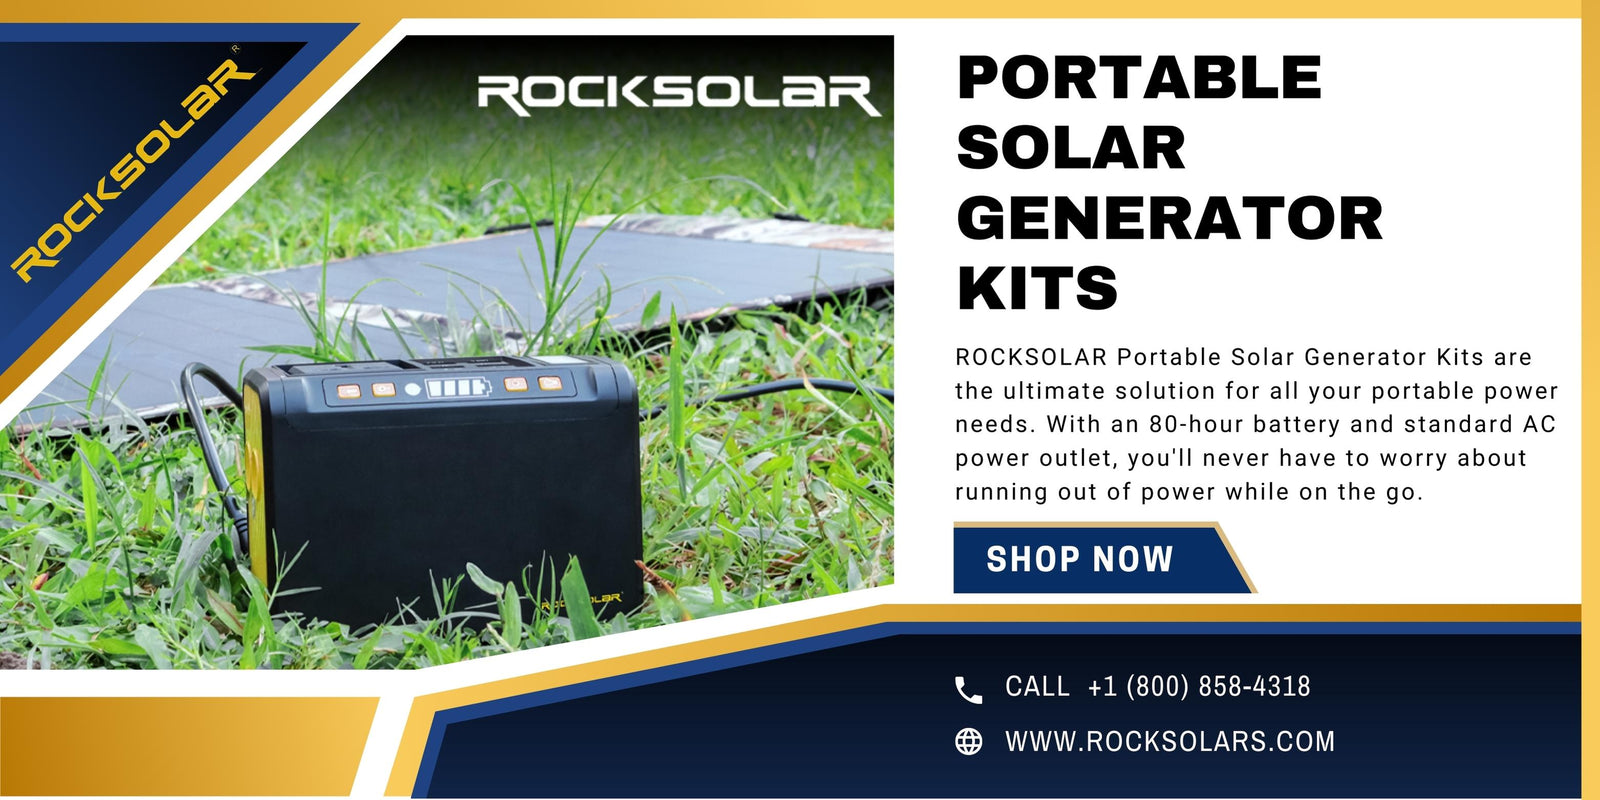 ROCKSOLAR Portable Solar Generator Kits – Perfect Power Solutions for the Outdoorsman